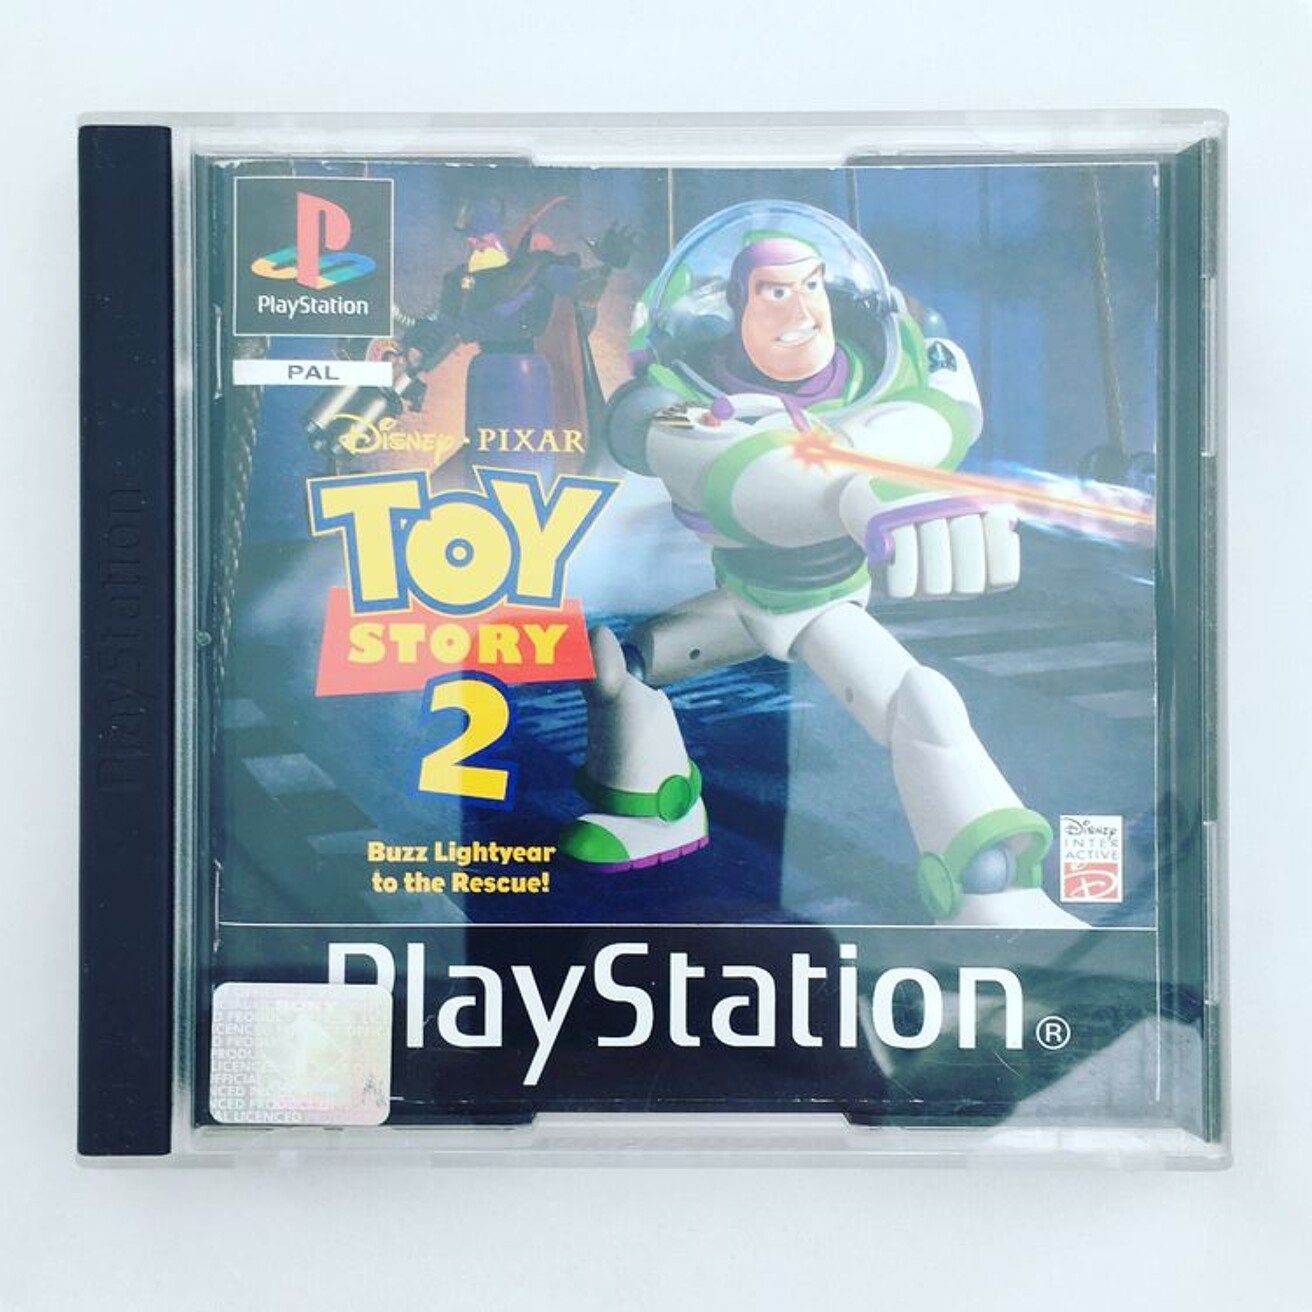 Toy Story 2 Buzz Lightyear To The Rescue Playstation 1 Disney Interactive Item Golisto